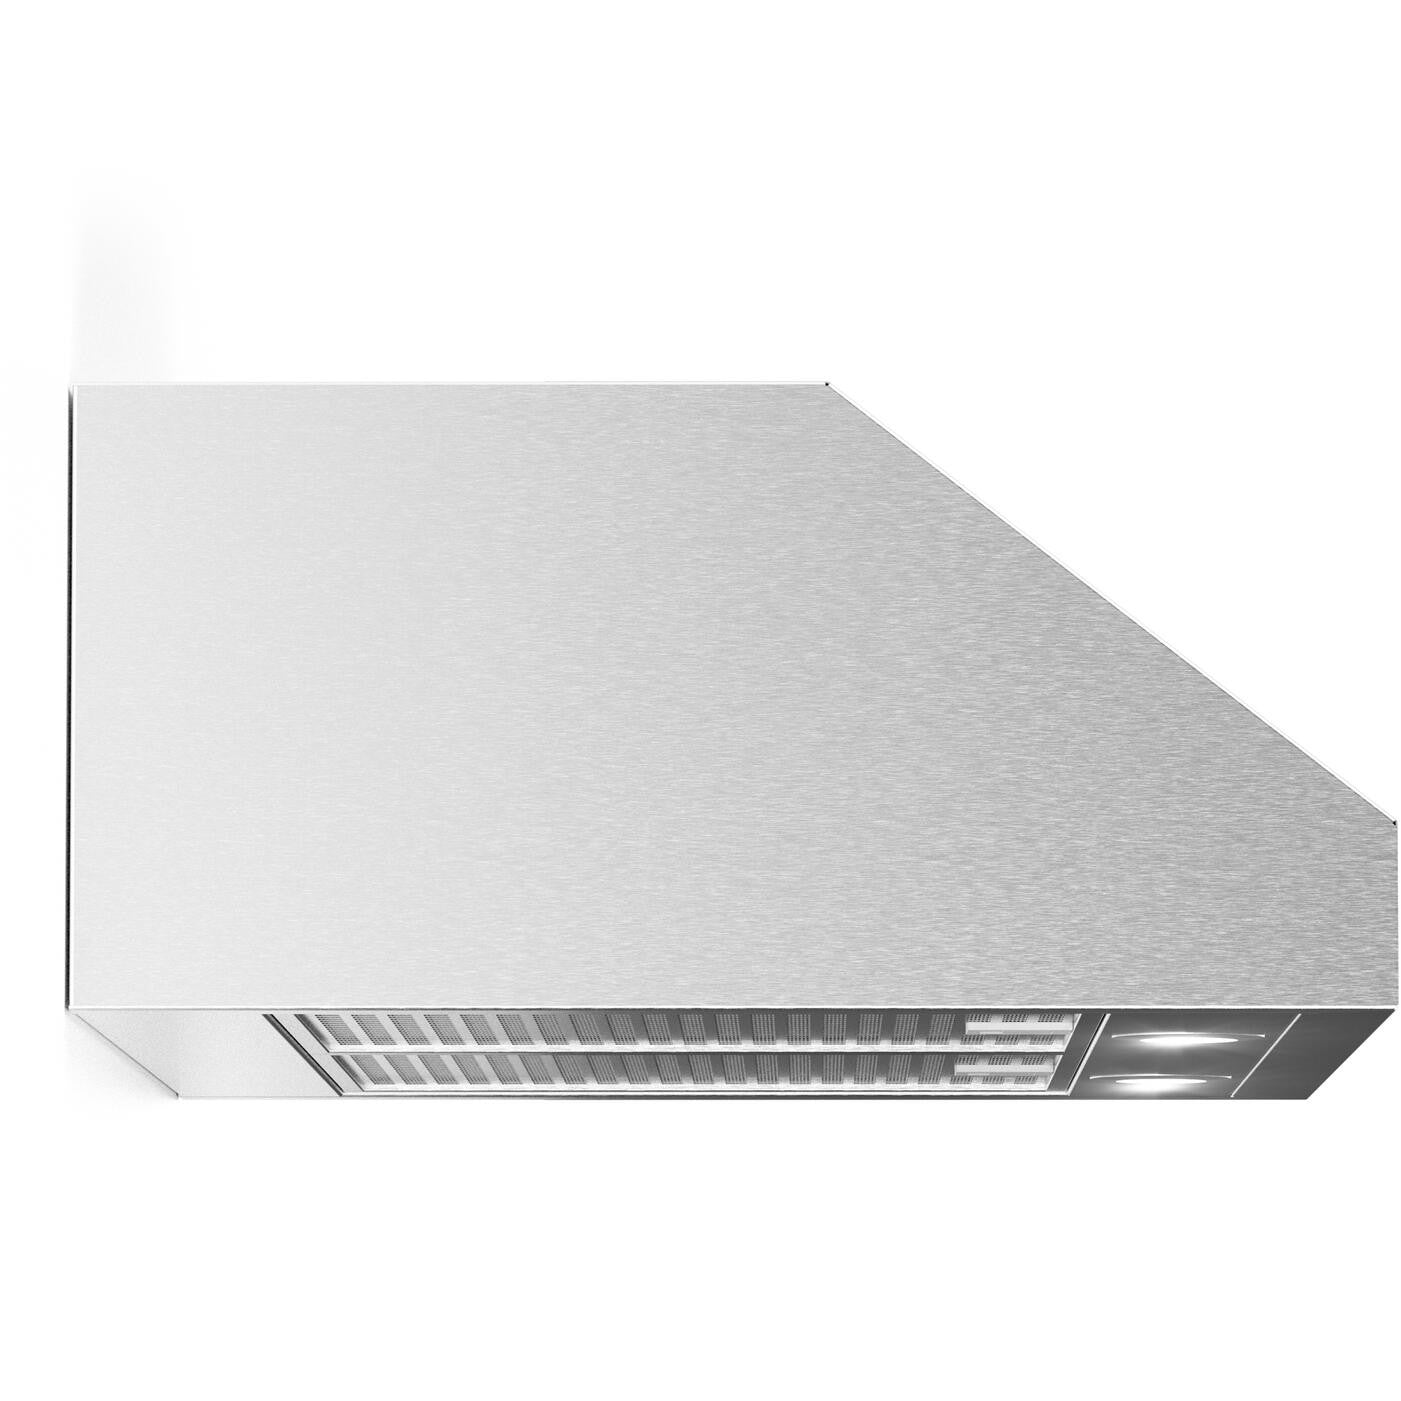 Forte Lucca 48" 600 CFM Convertible Residential Round Duct Stainless Steel Under Cabinet Range Hood With Charcoal Filters, and LED Lighting